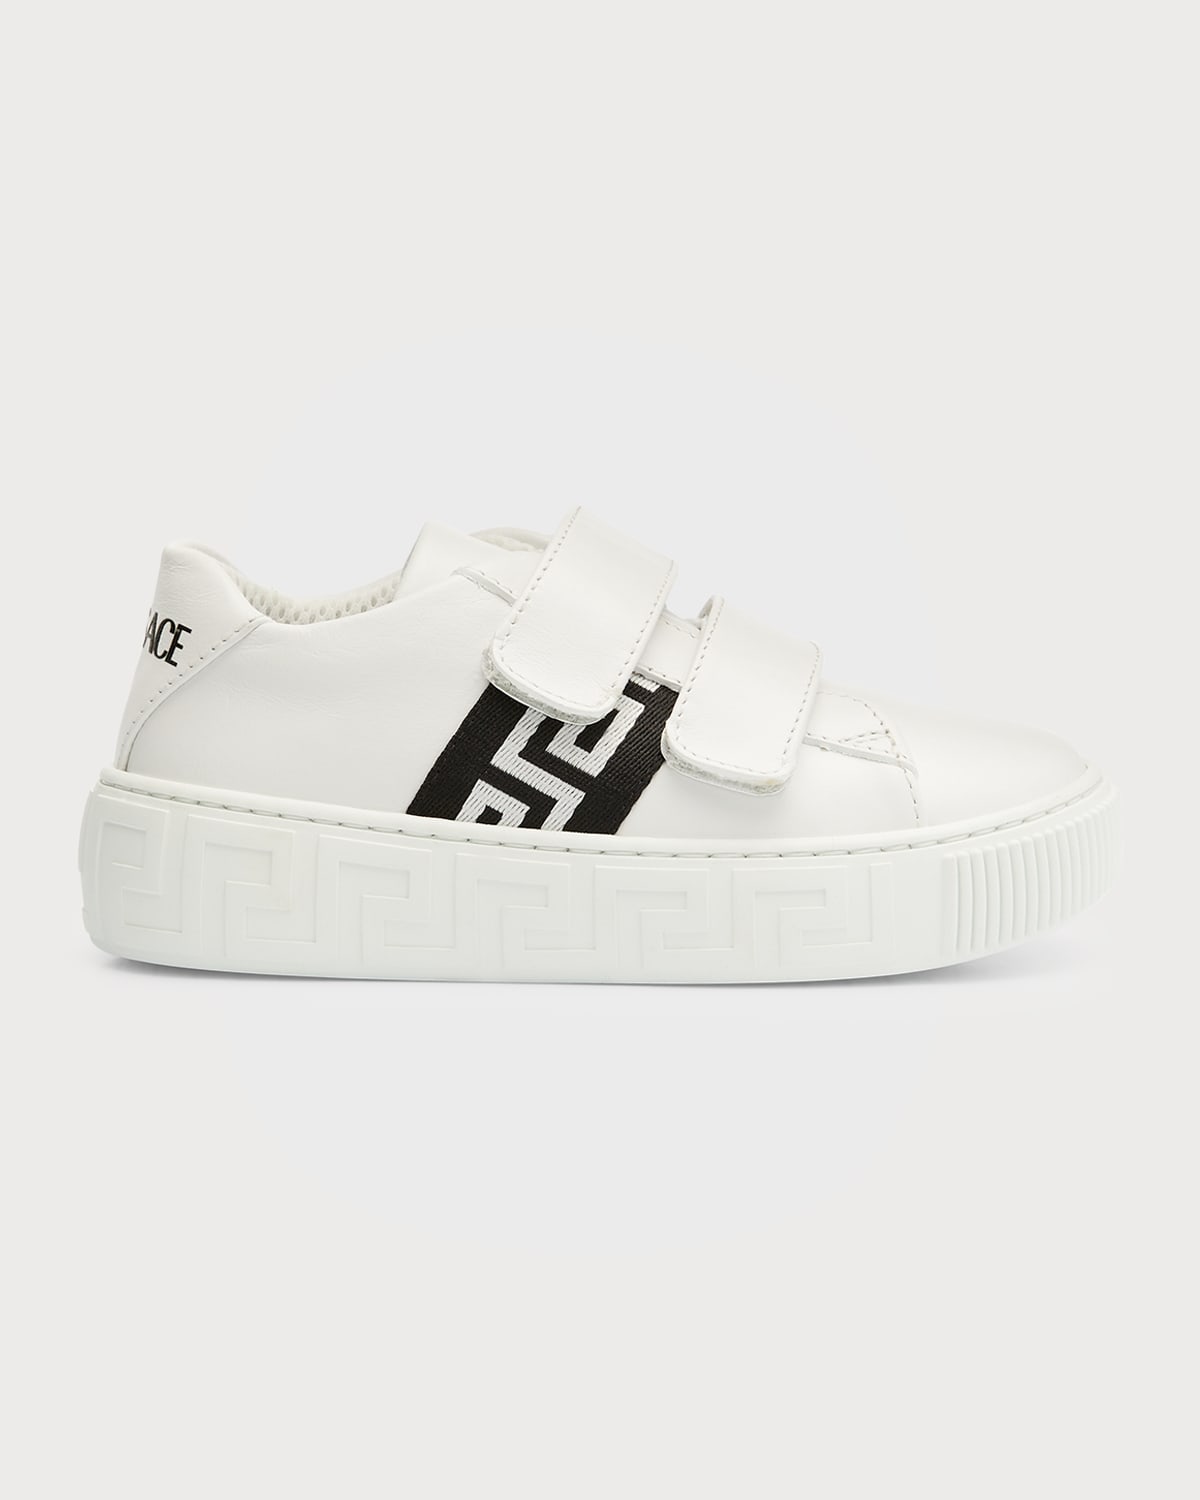 Versace Kid's Greca Leather Grip-strap Sneakers, Toddlers/kids In White